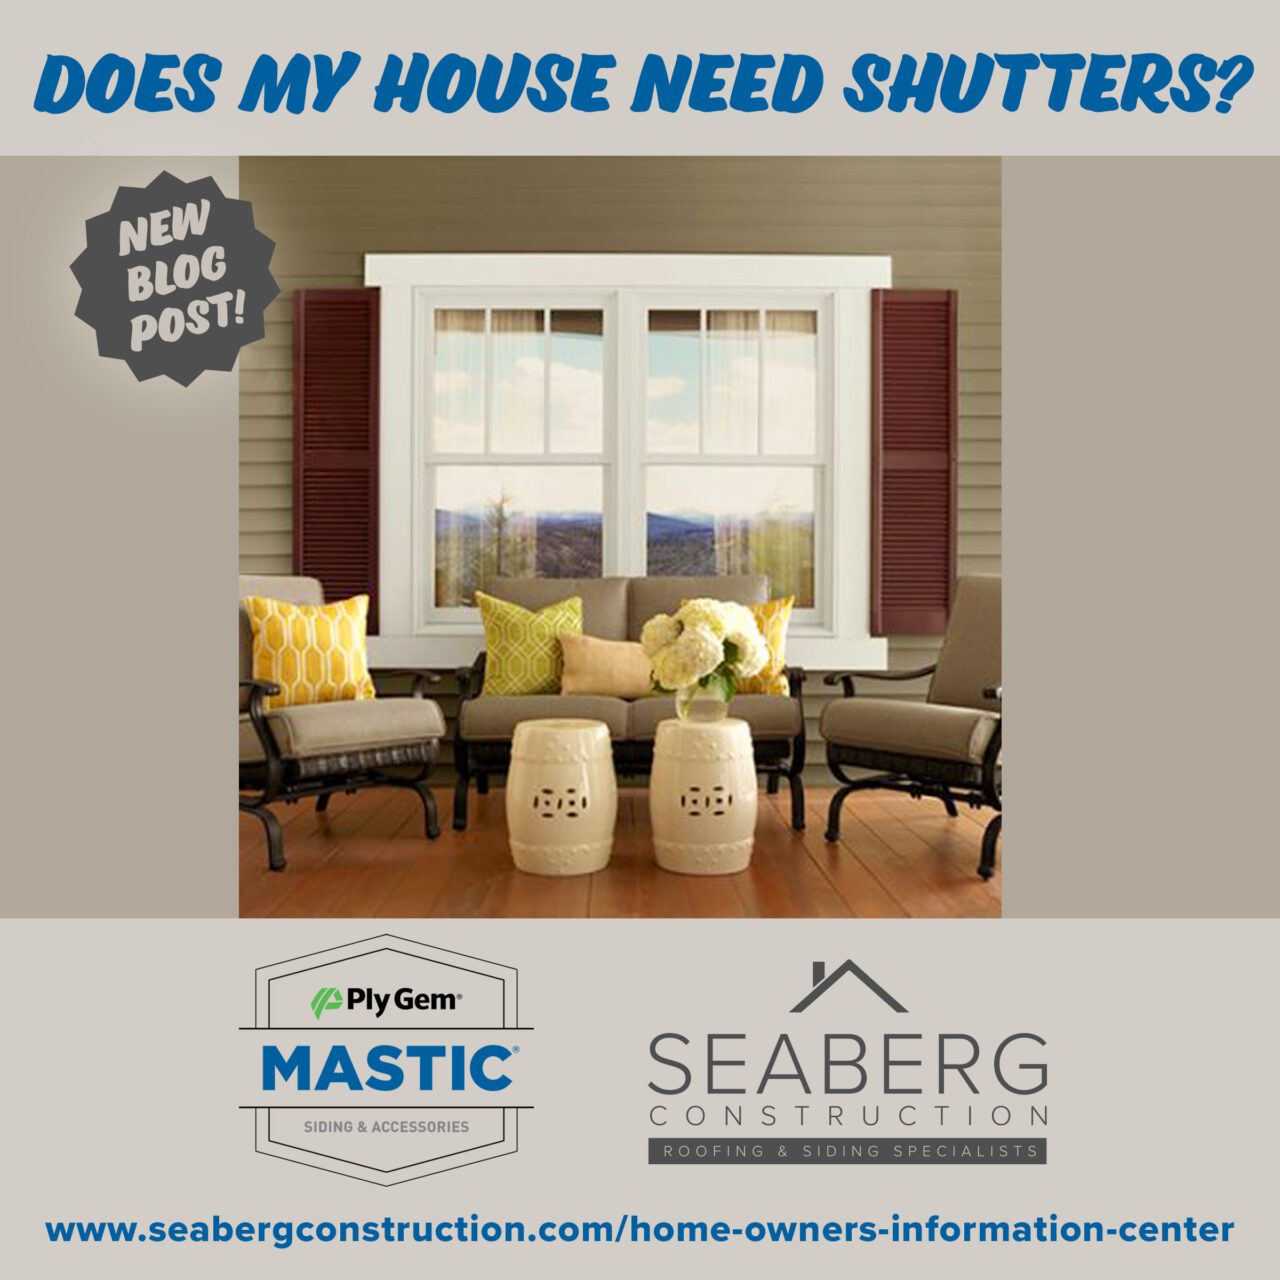 Seaberg Construction Blog: Does My House Need Shutters?